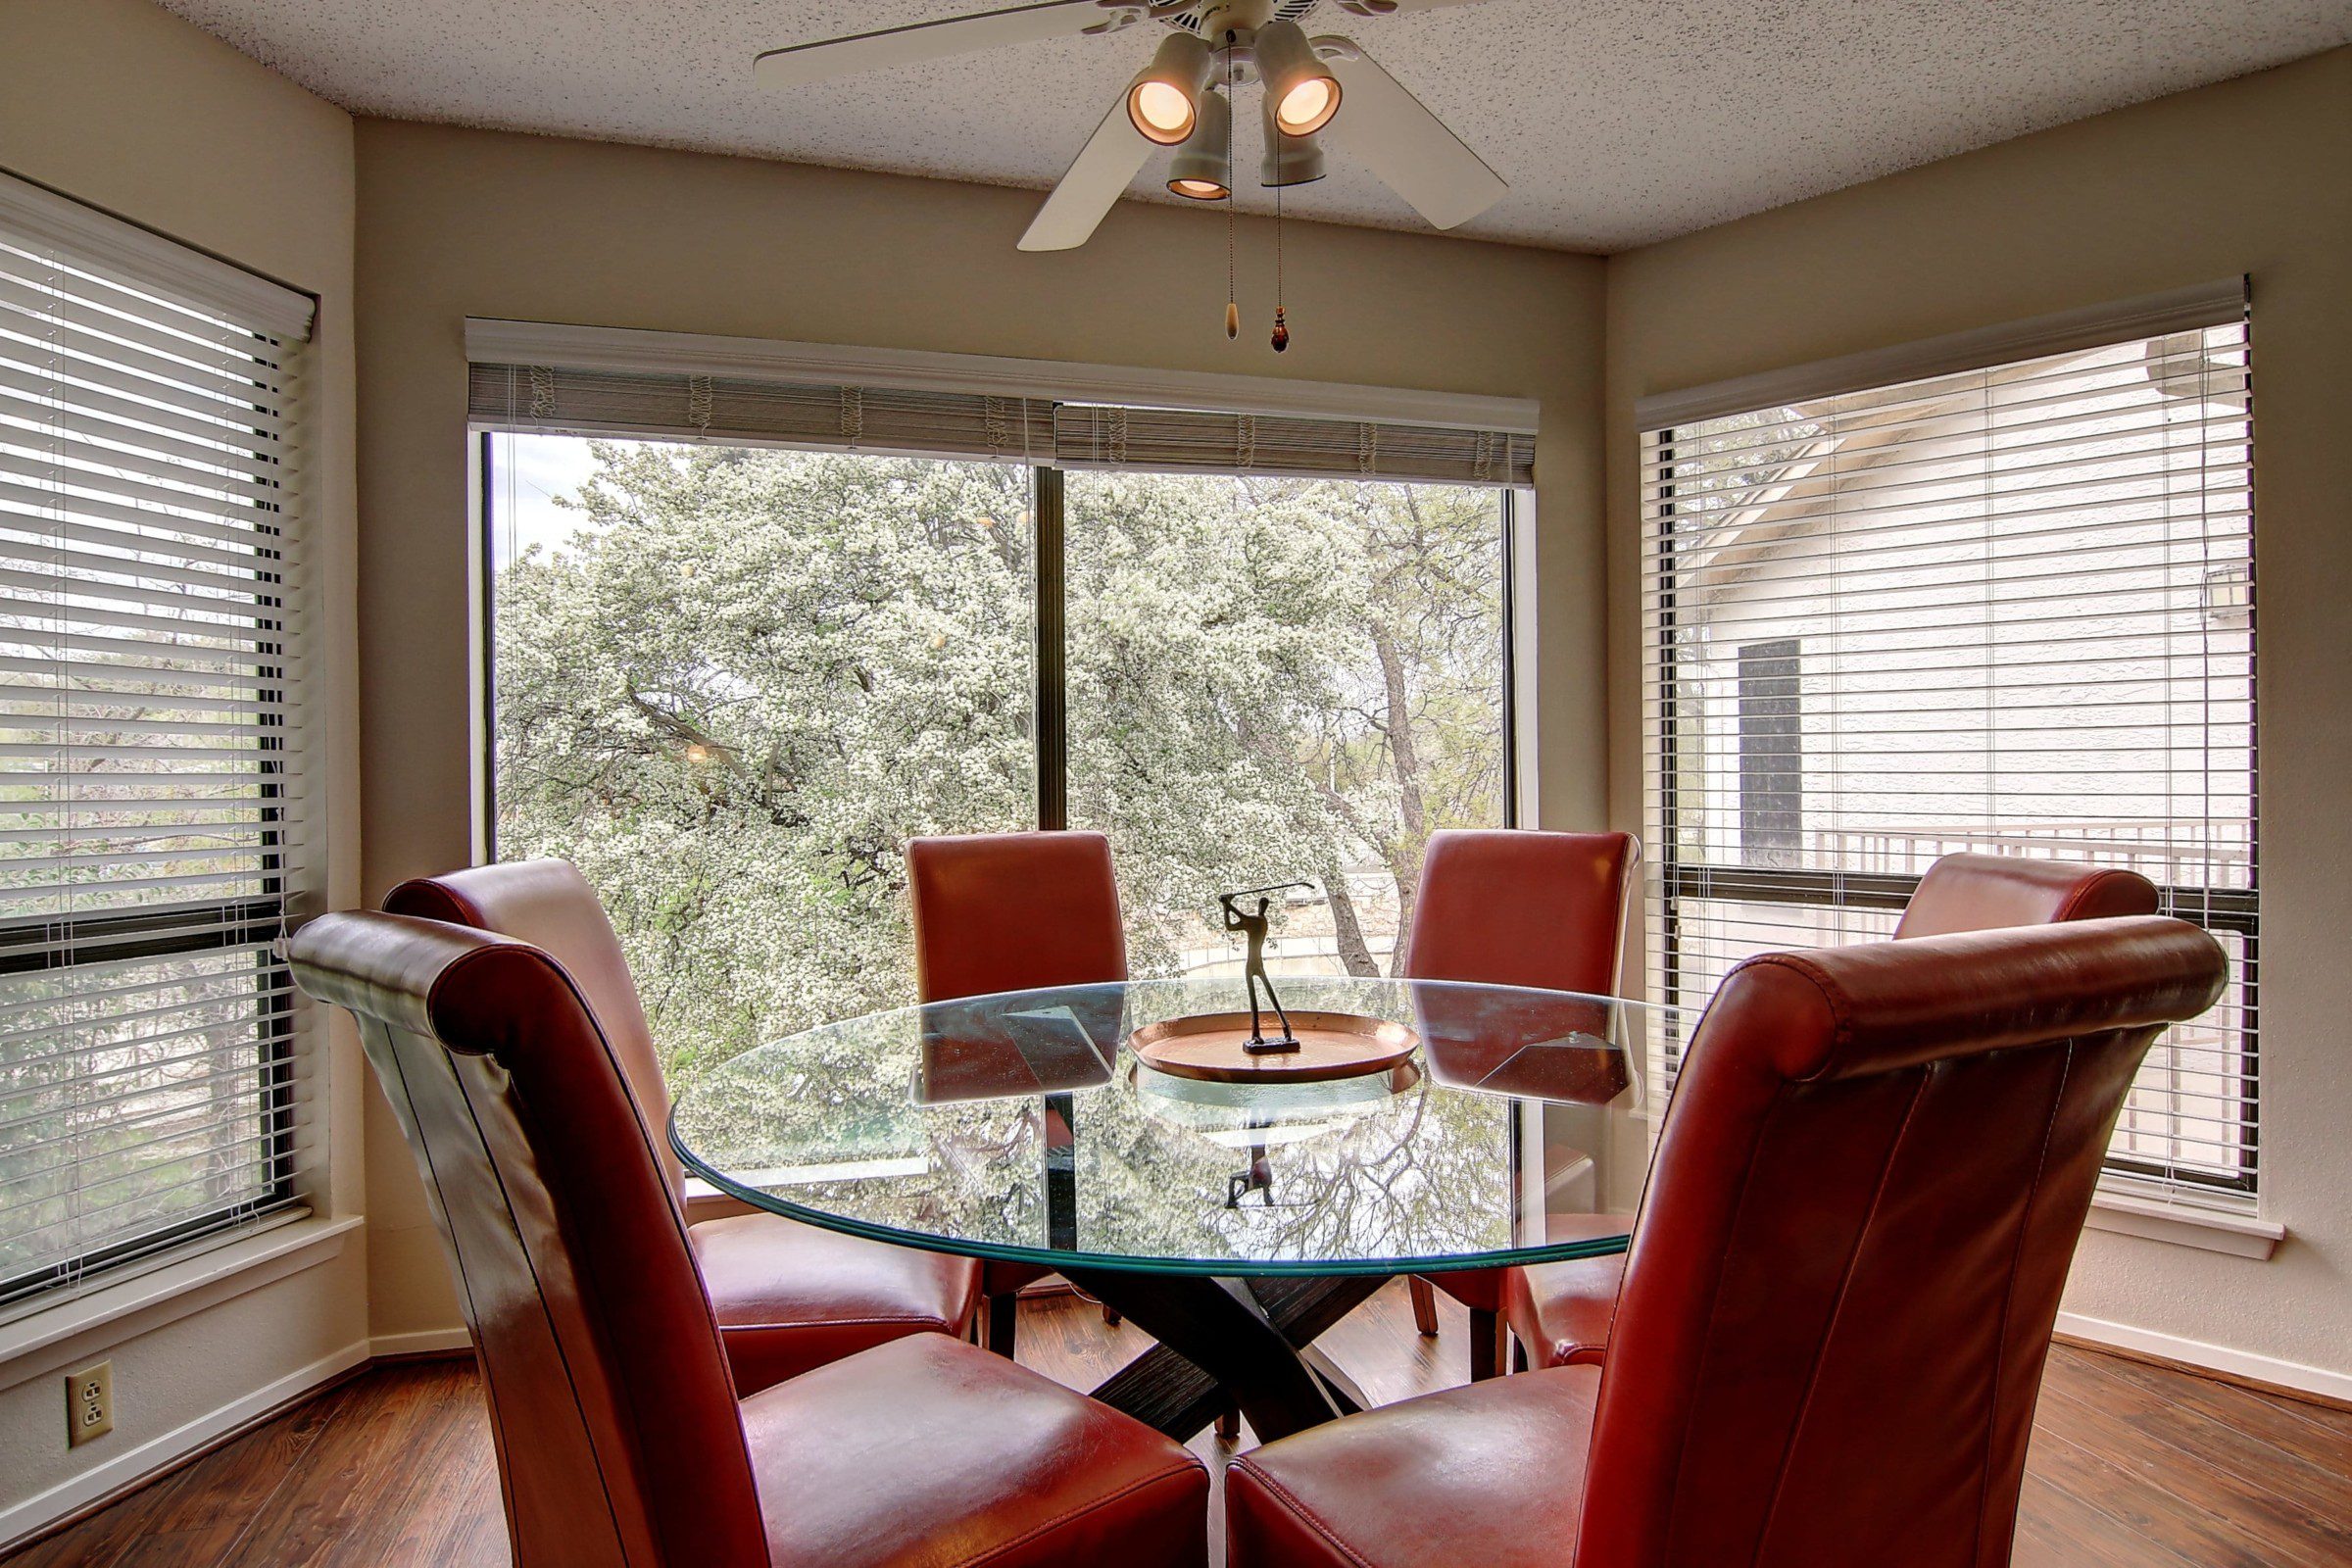 Comal River vacation home dining table.